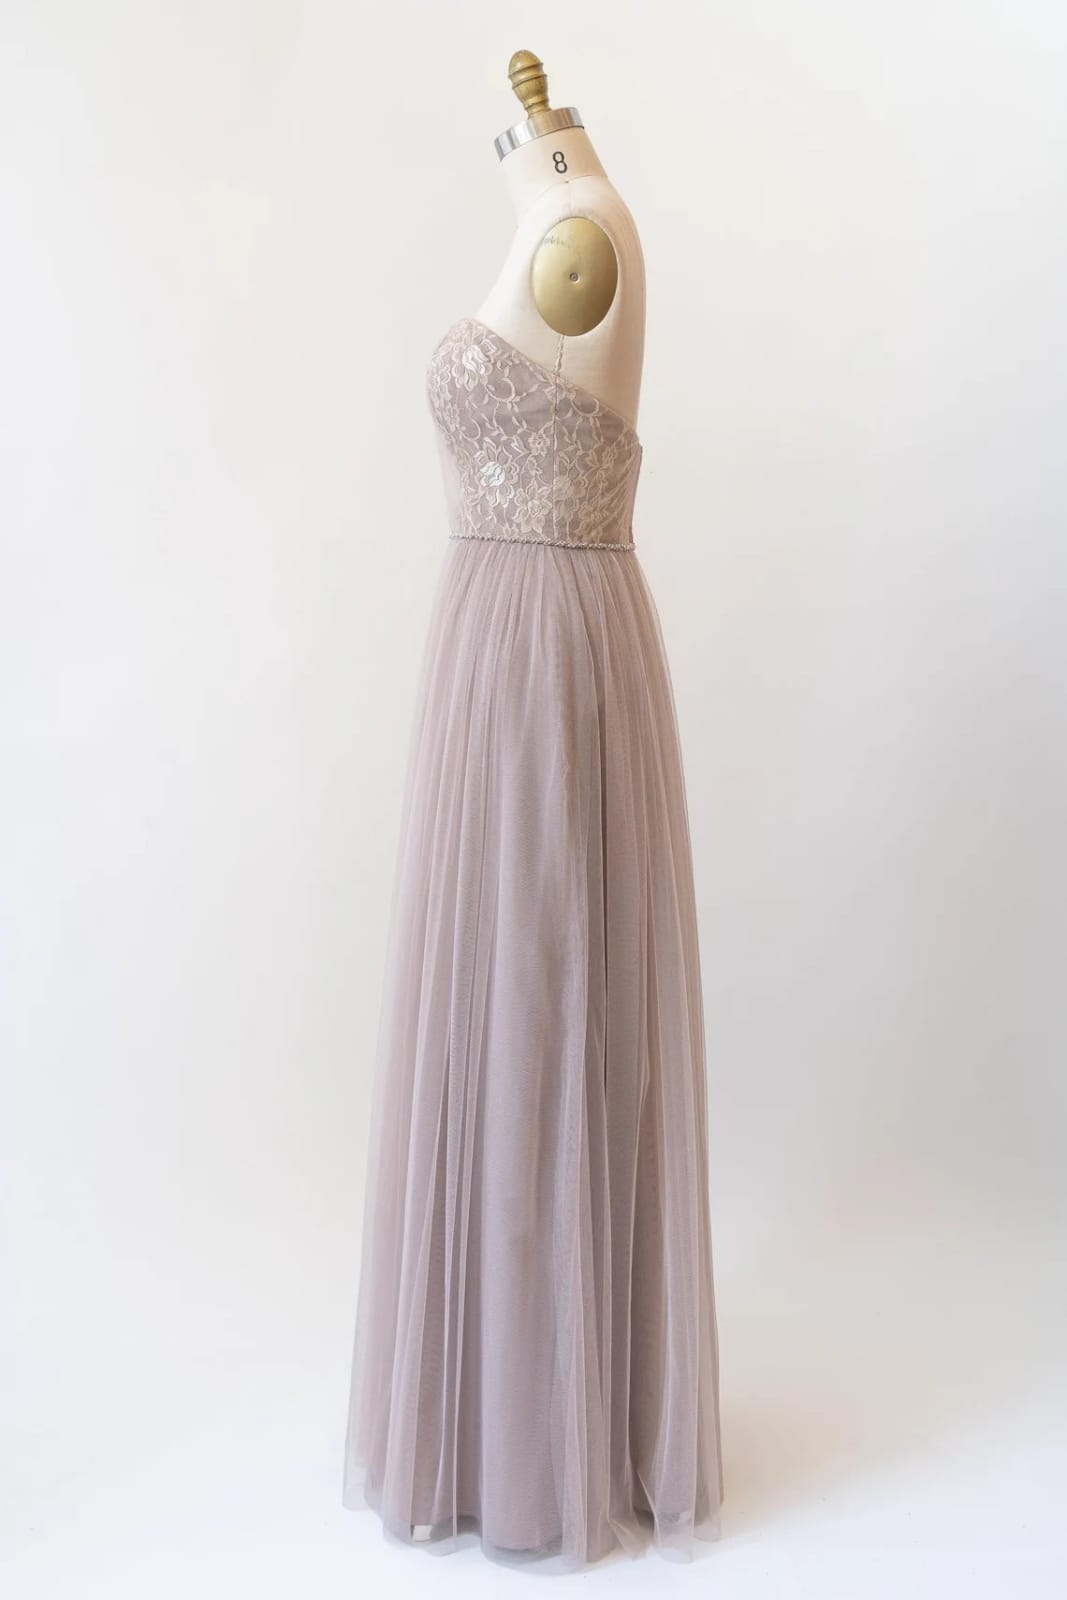 Sweetheart Grey Lace Tulle Long Strapless Bridesmaid Dress, Beads